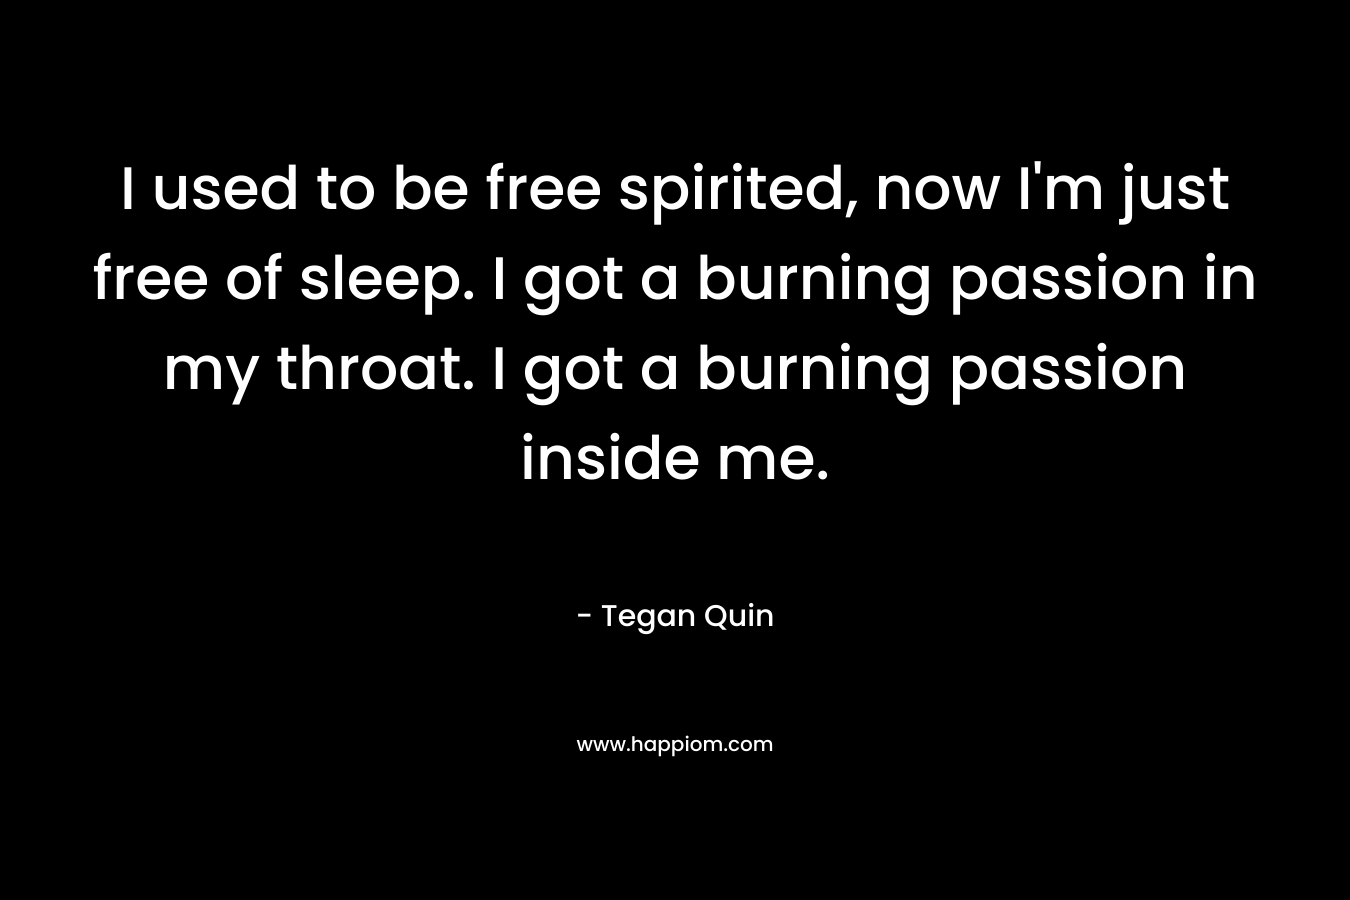 I used to be free spirited, now I'm just free of sleep. I got a burning passion in my throat. I got a burning passion inside me.